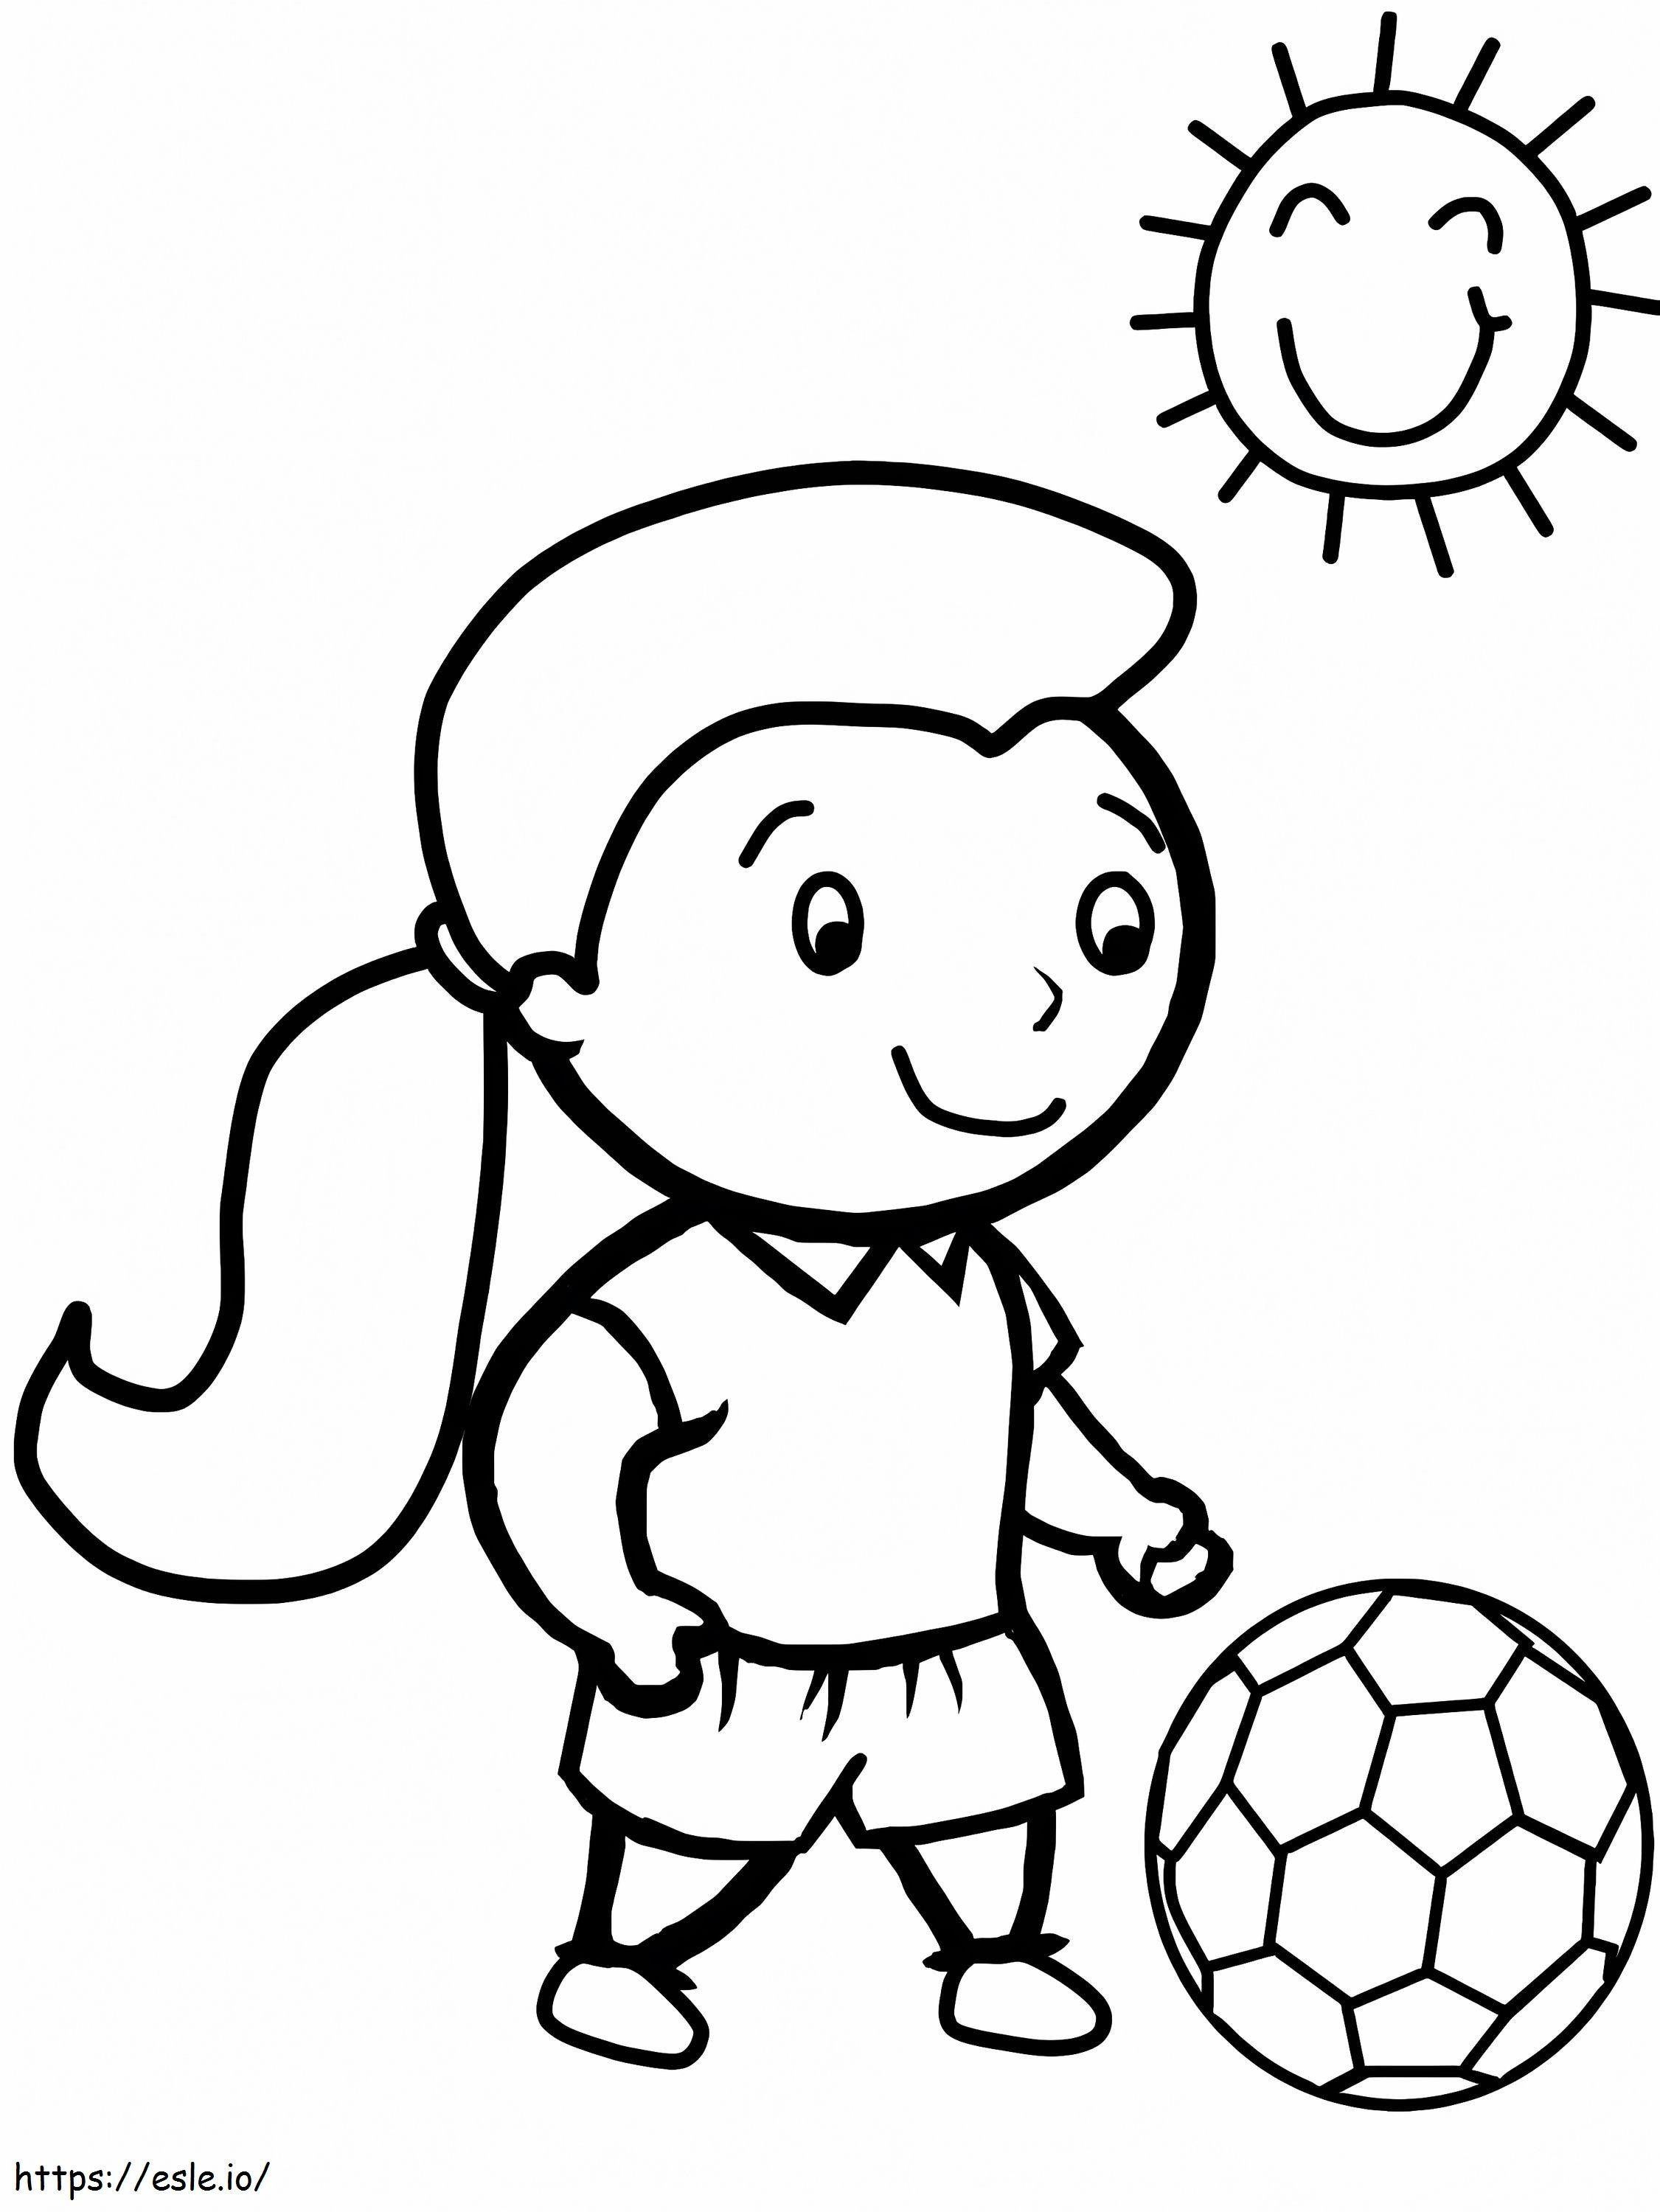 Girl Playing Soccer 1 coloring page